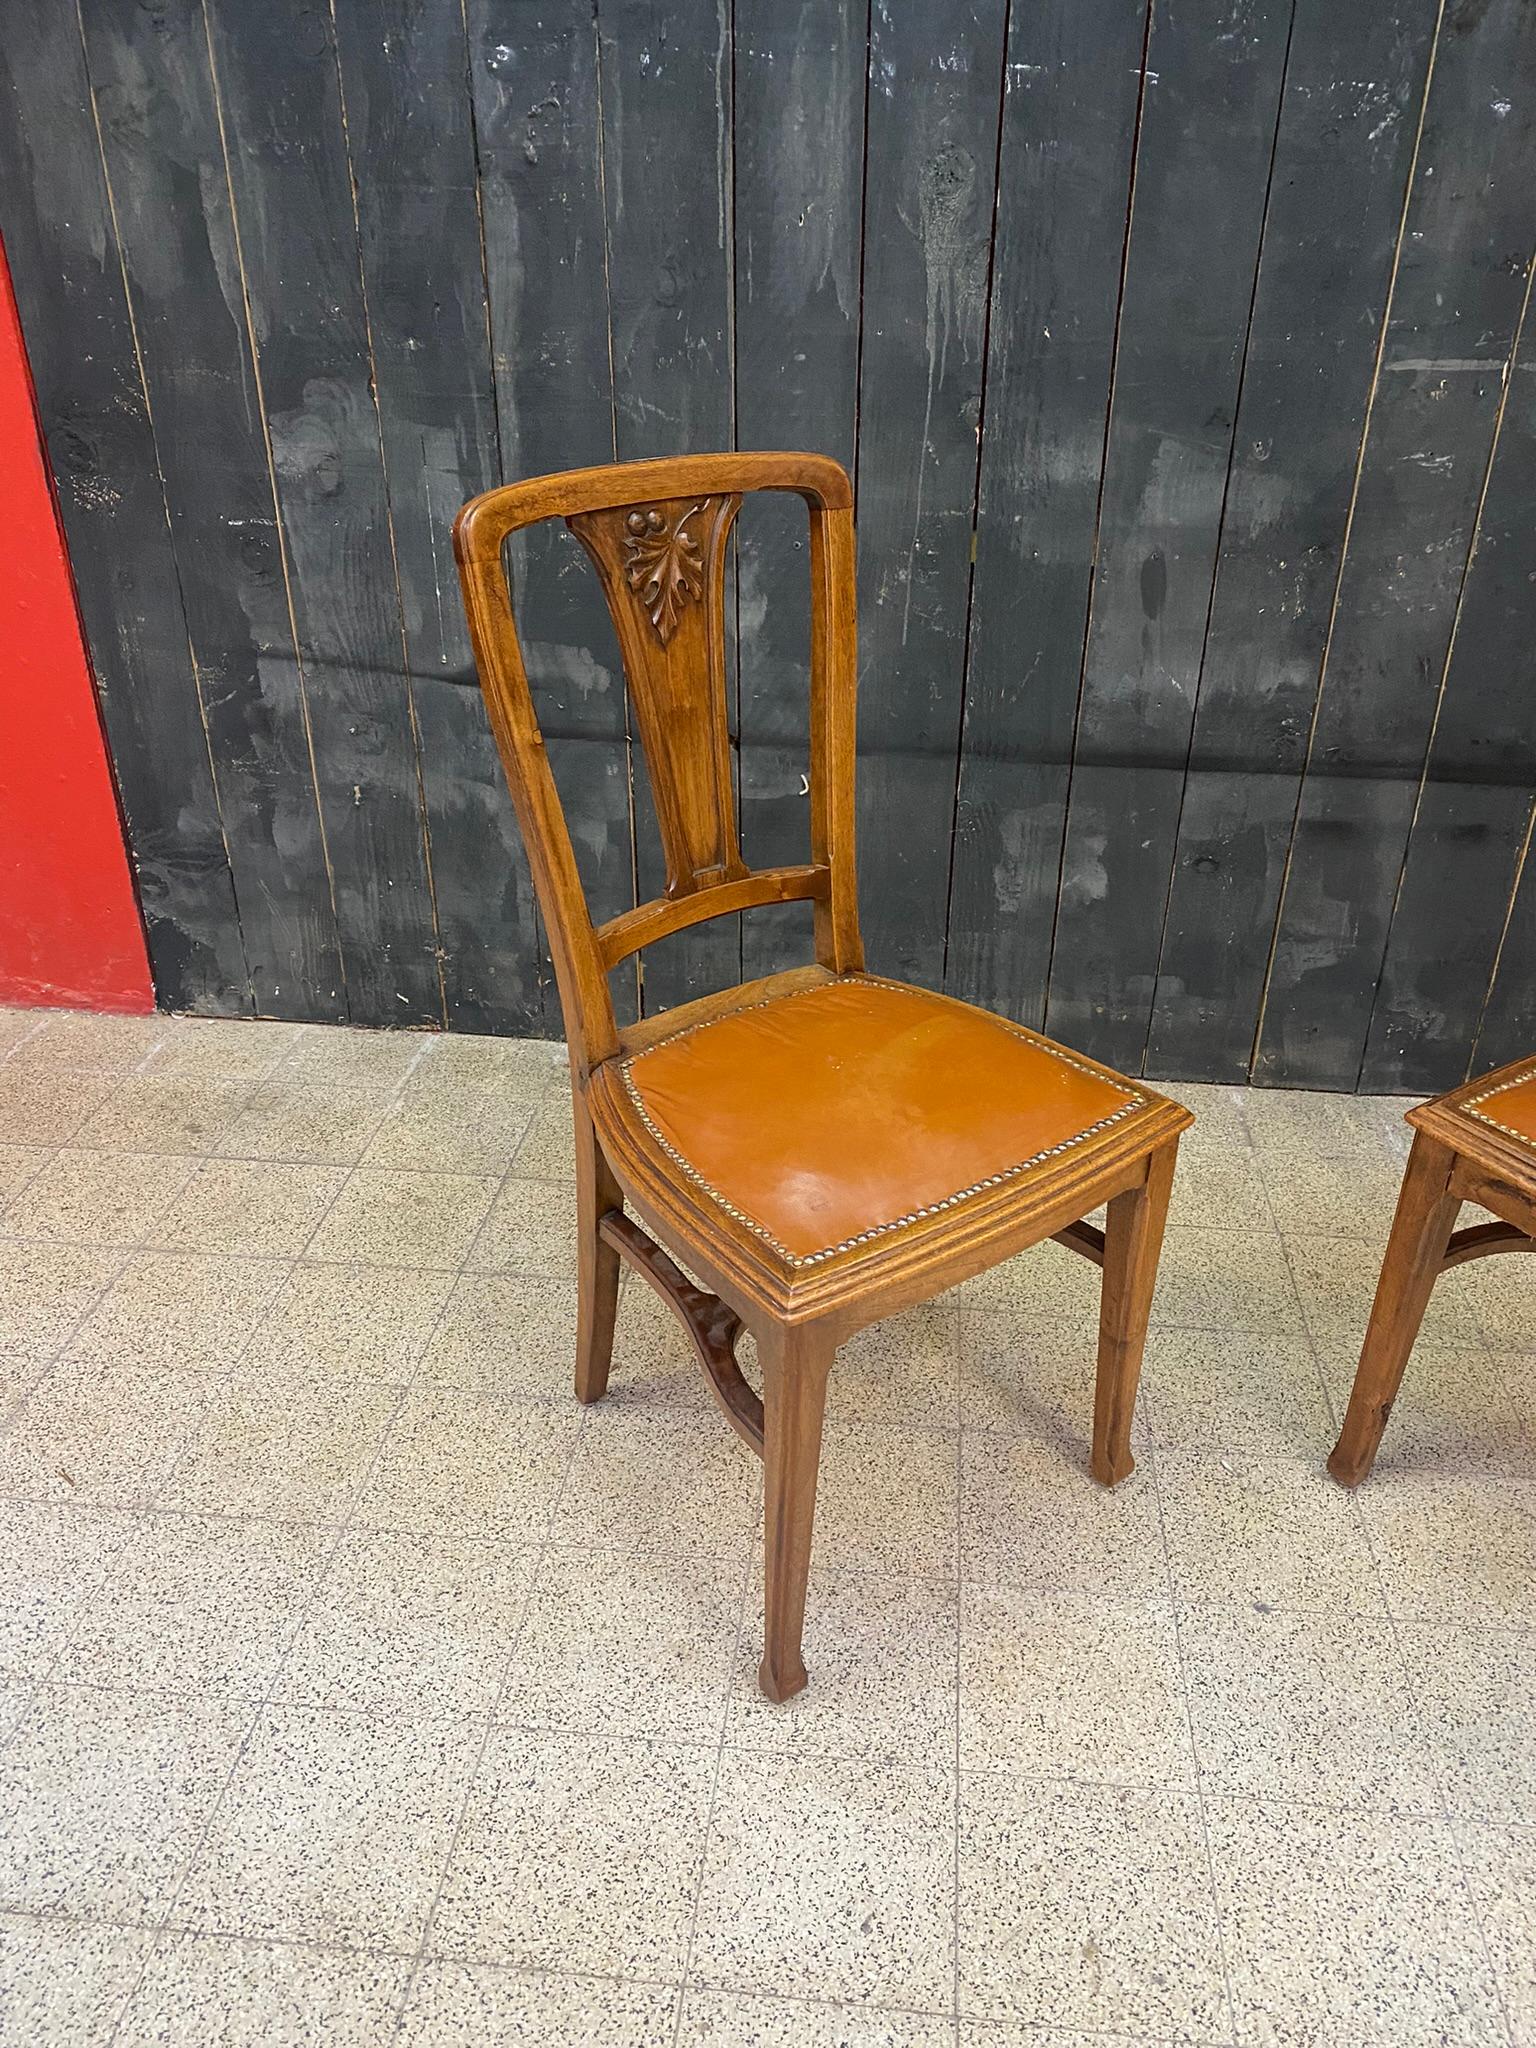 Attributed to Gauthier-Poinsignon & Cie, 6 Art Nouveau Chairs Leather Seats In Good Condition For Sale In Mouscron, WHT